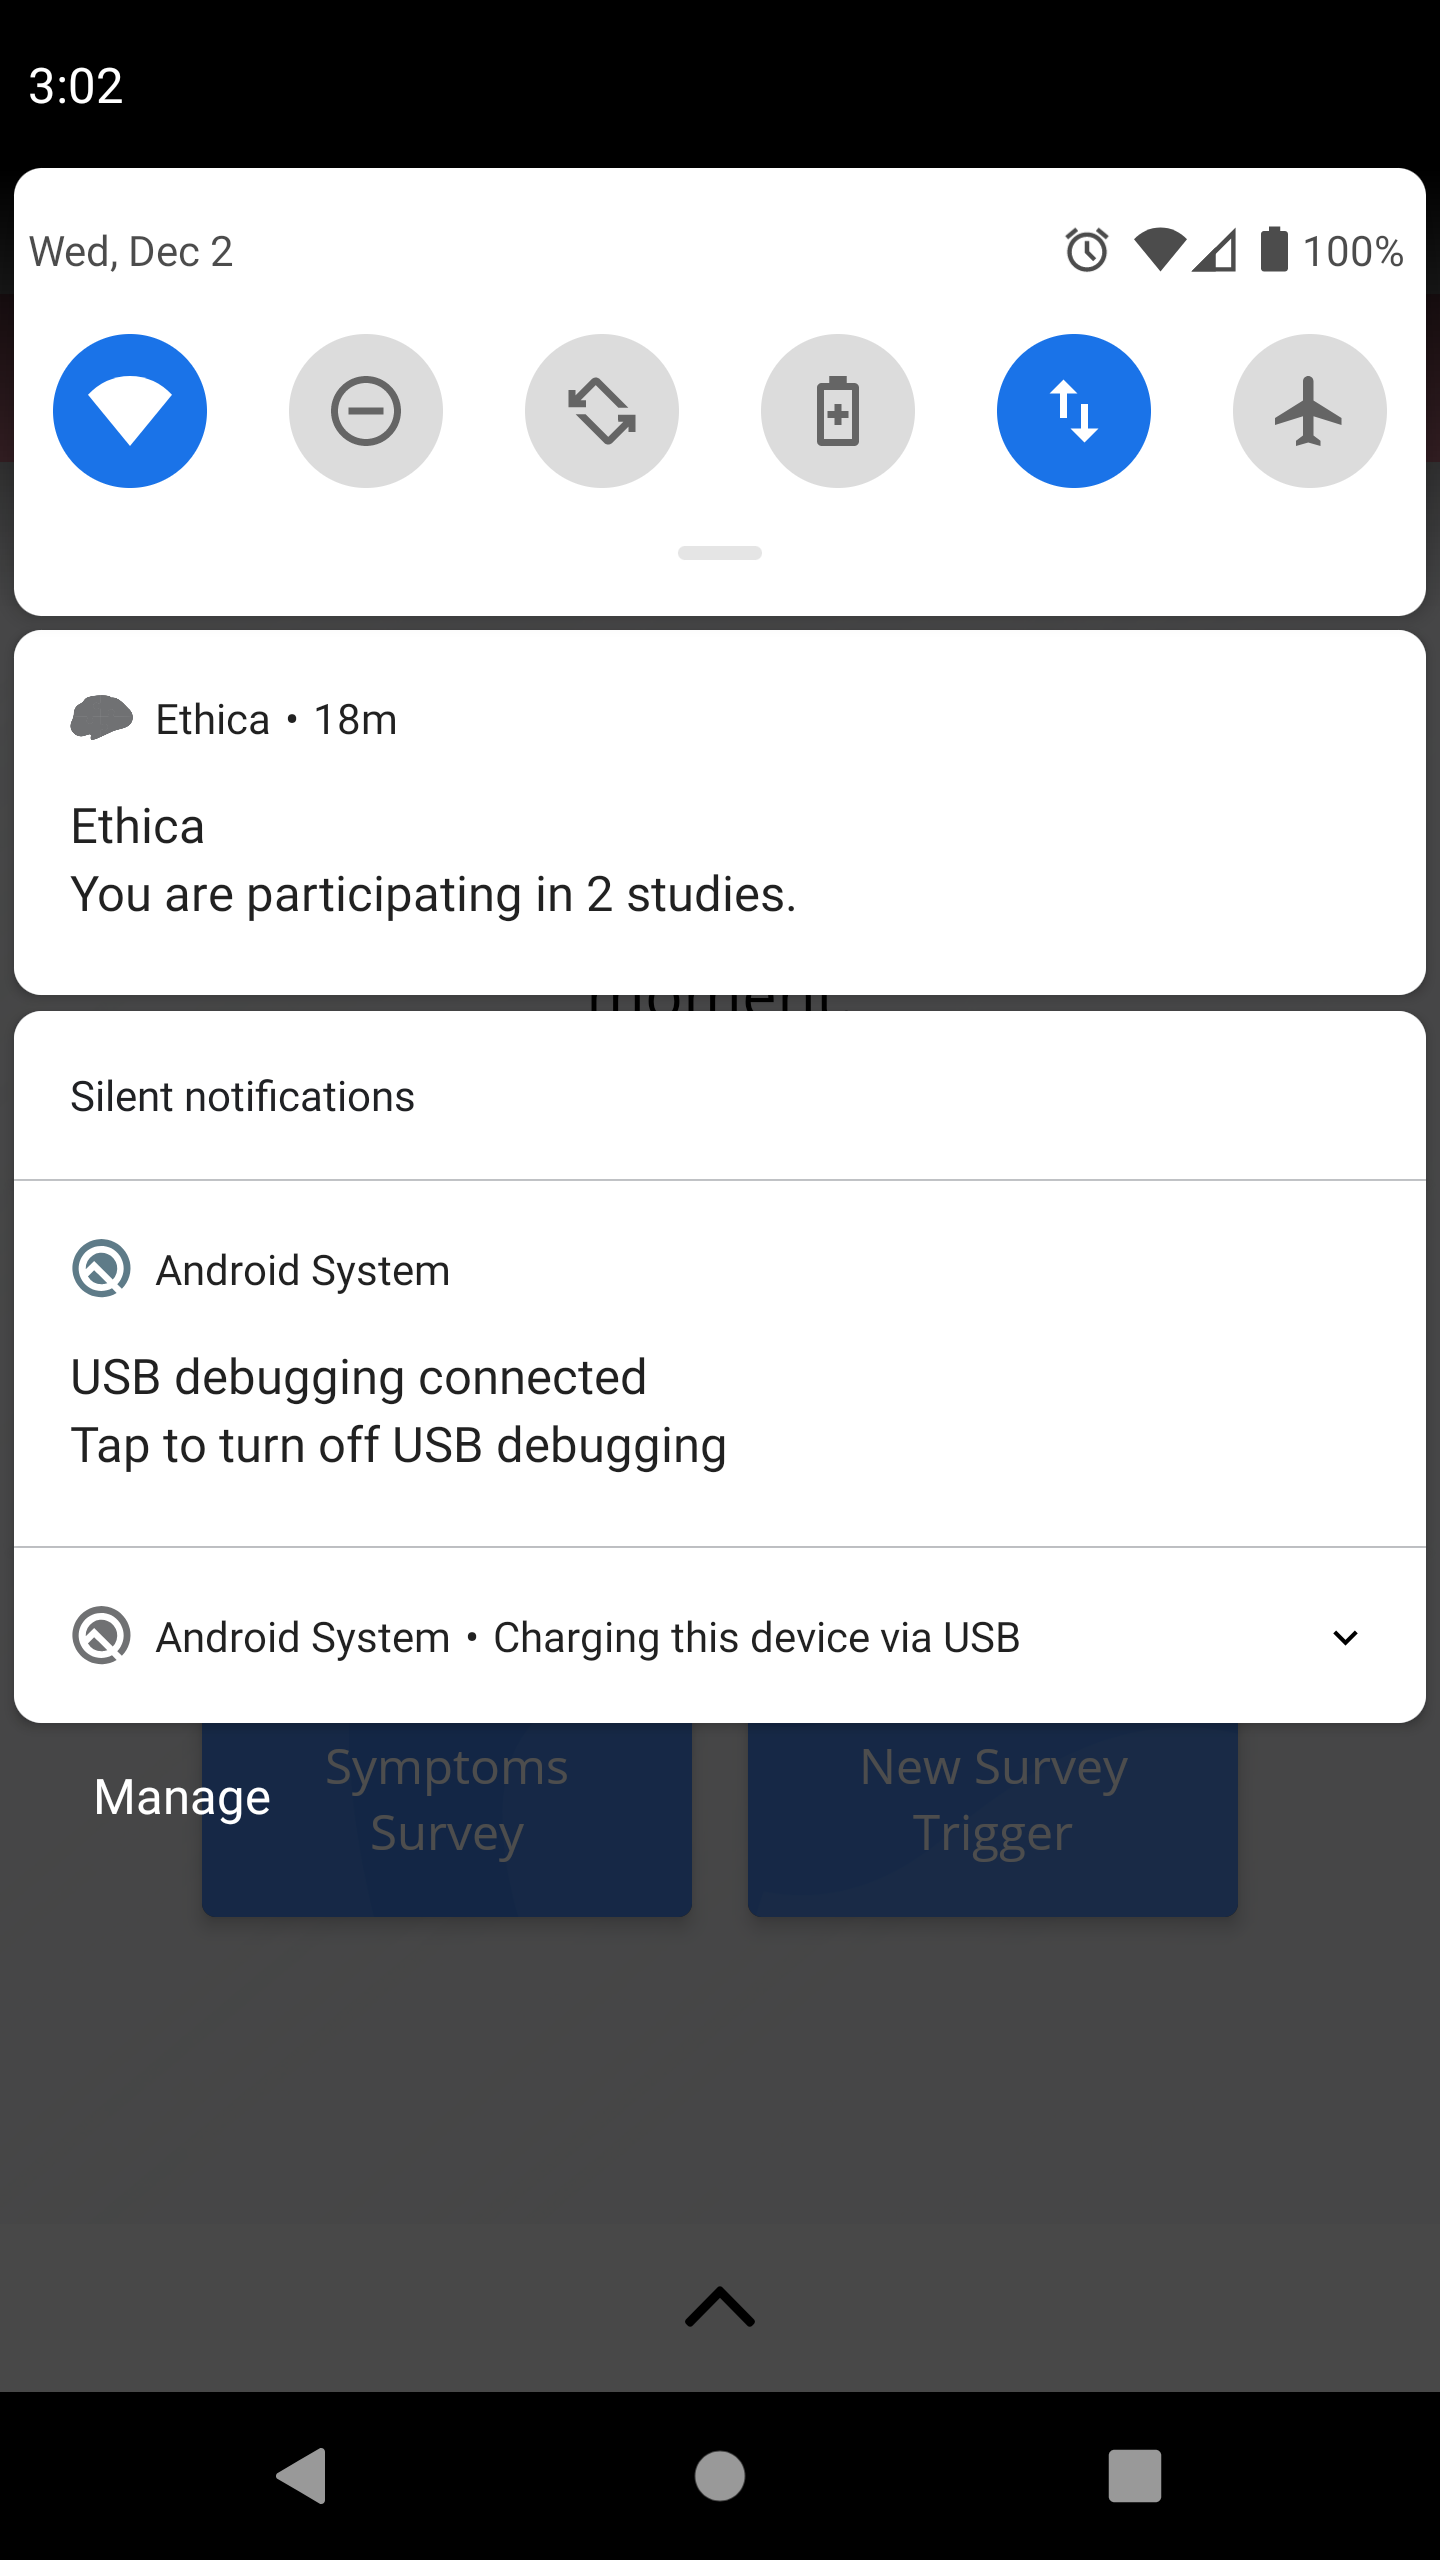 Avicenna App for Android Showing a Sticky Notification